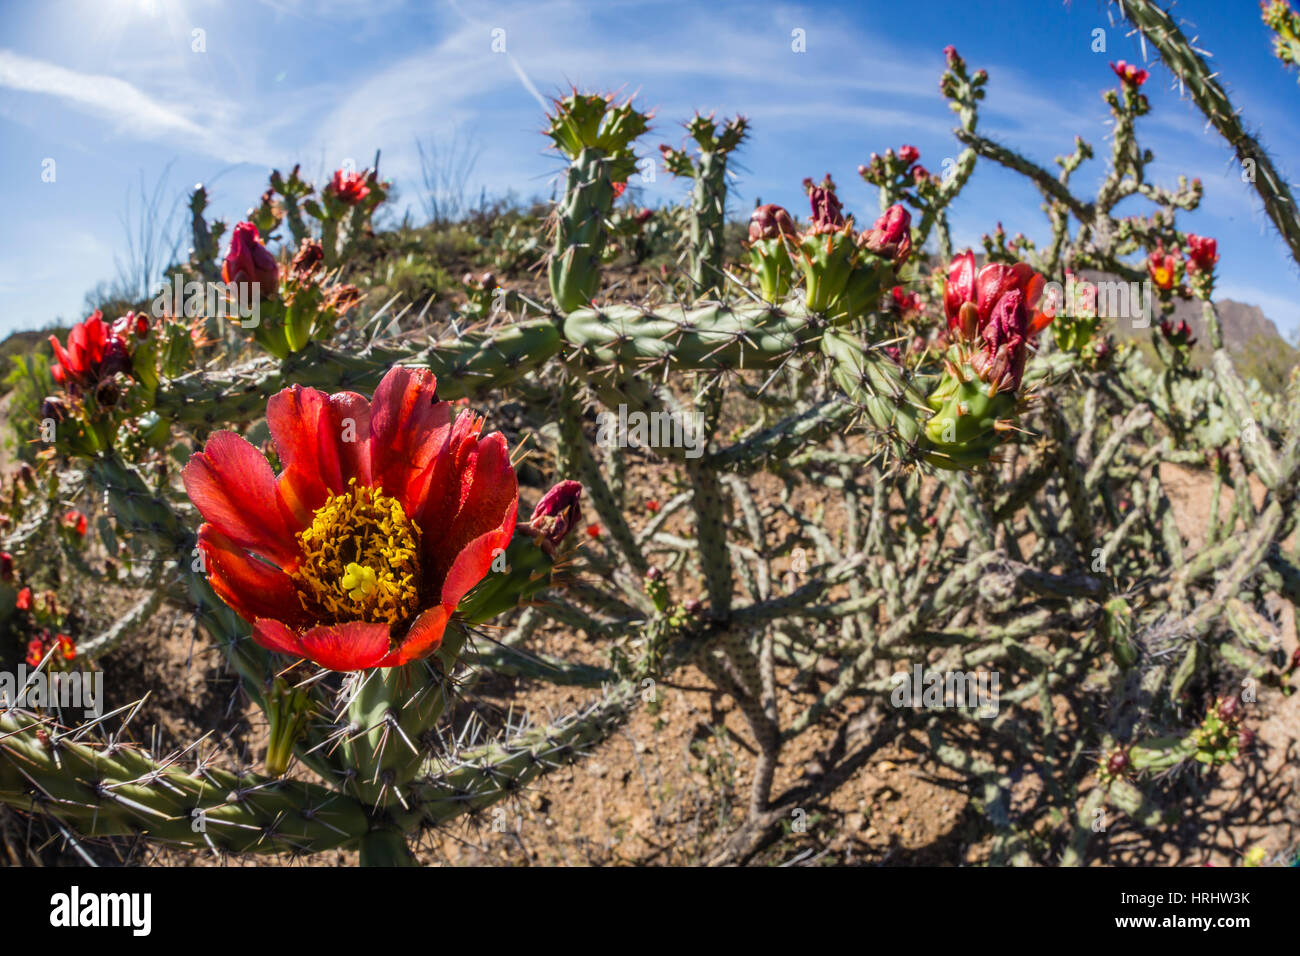 Flowering cholla cactus, in the Sweetwater Preserve, Tucson, Arizona, United States of America, North America Stock Photo